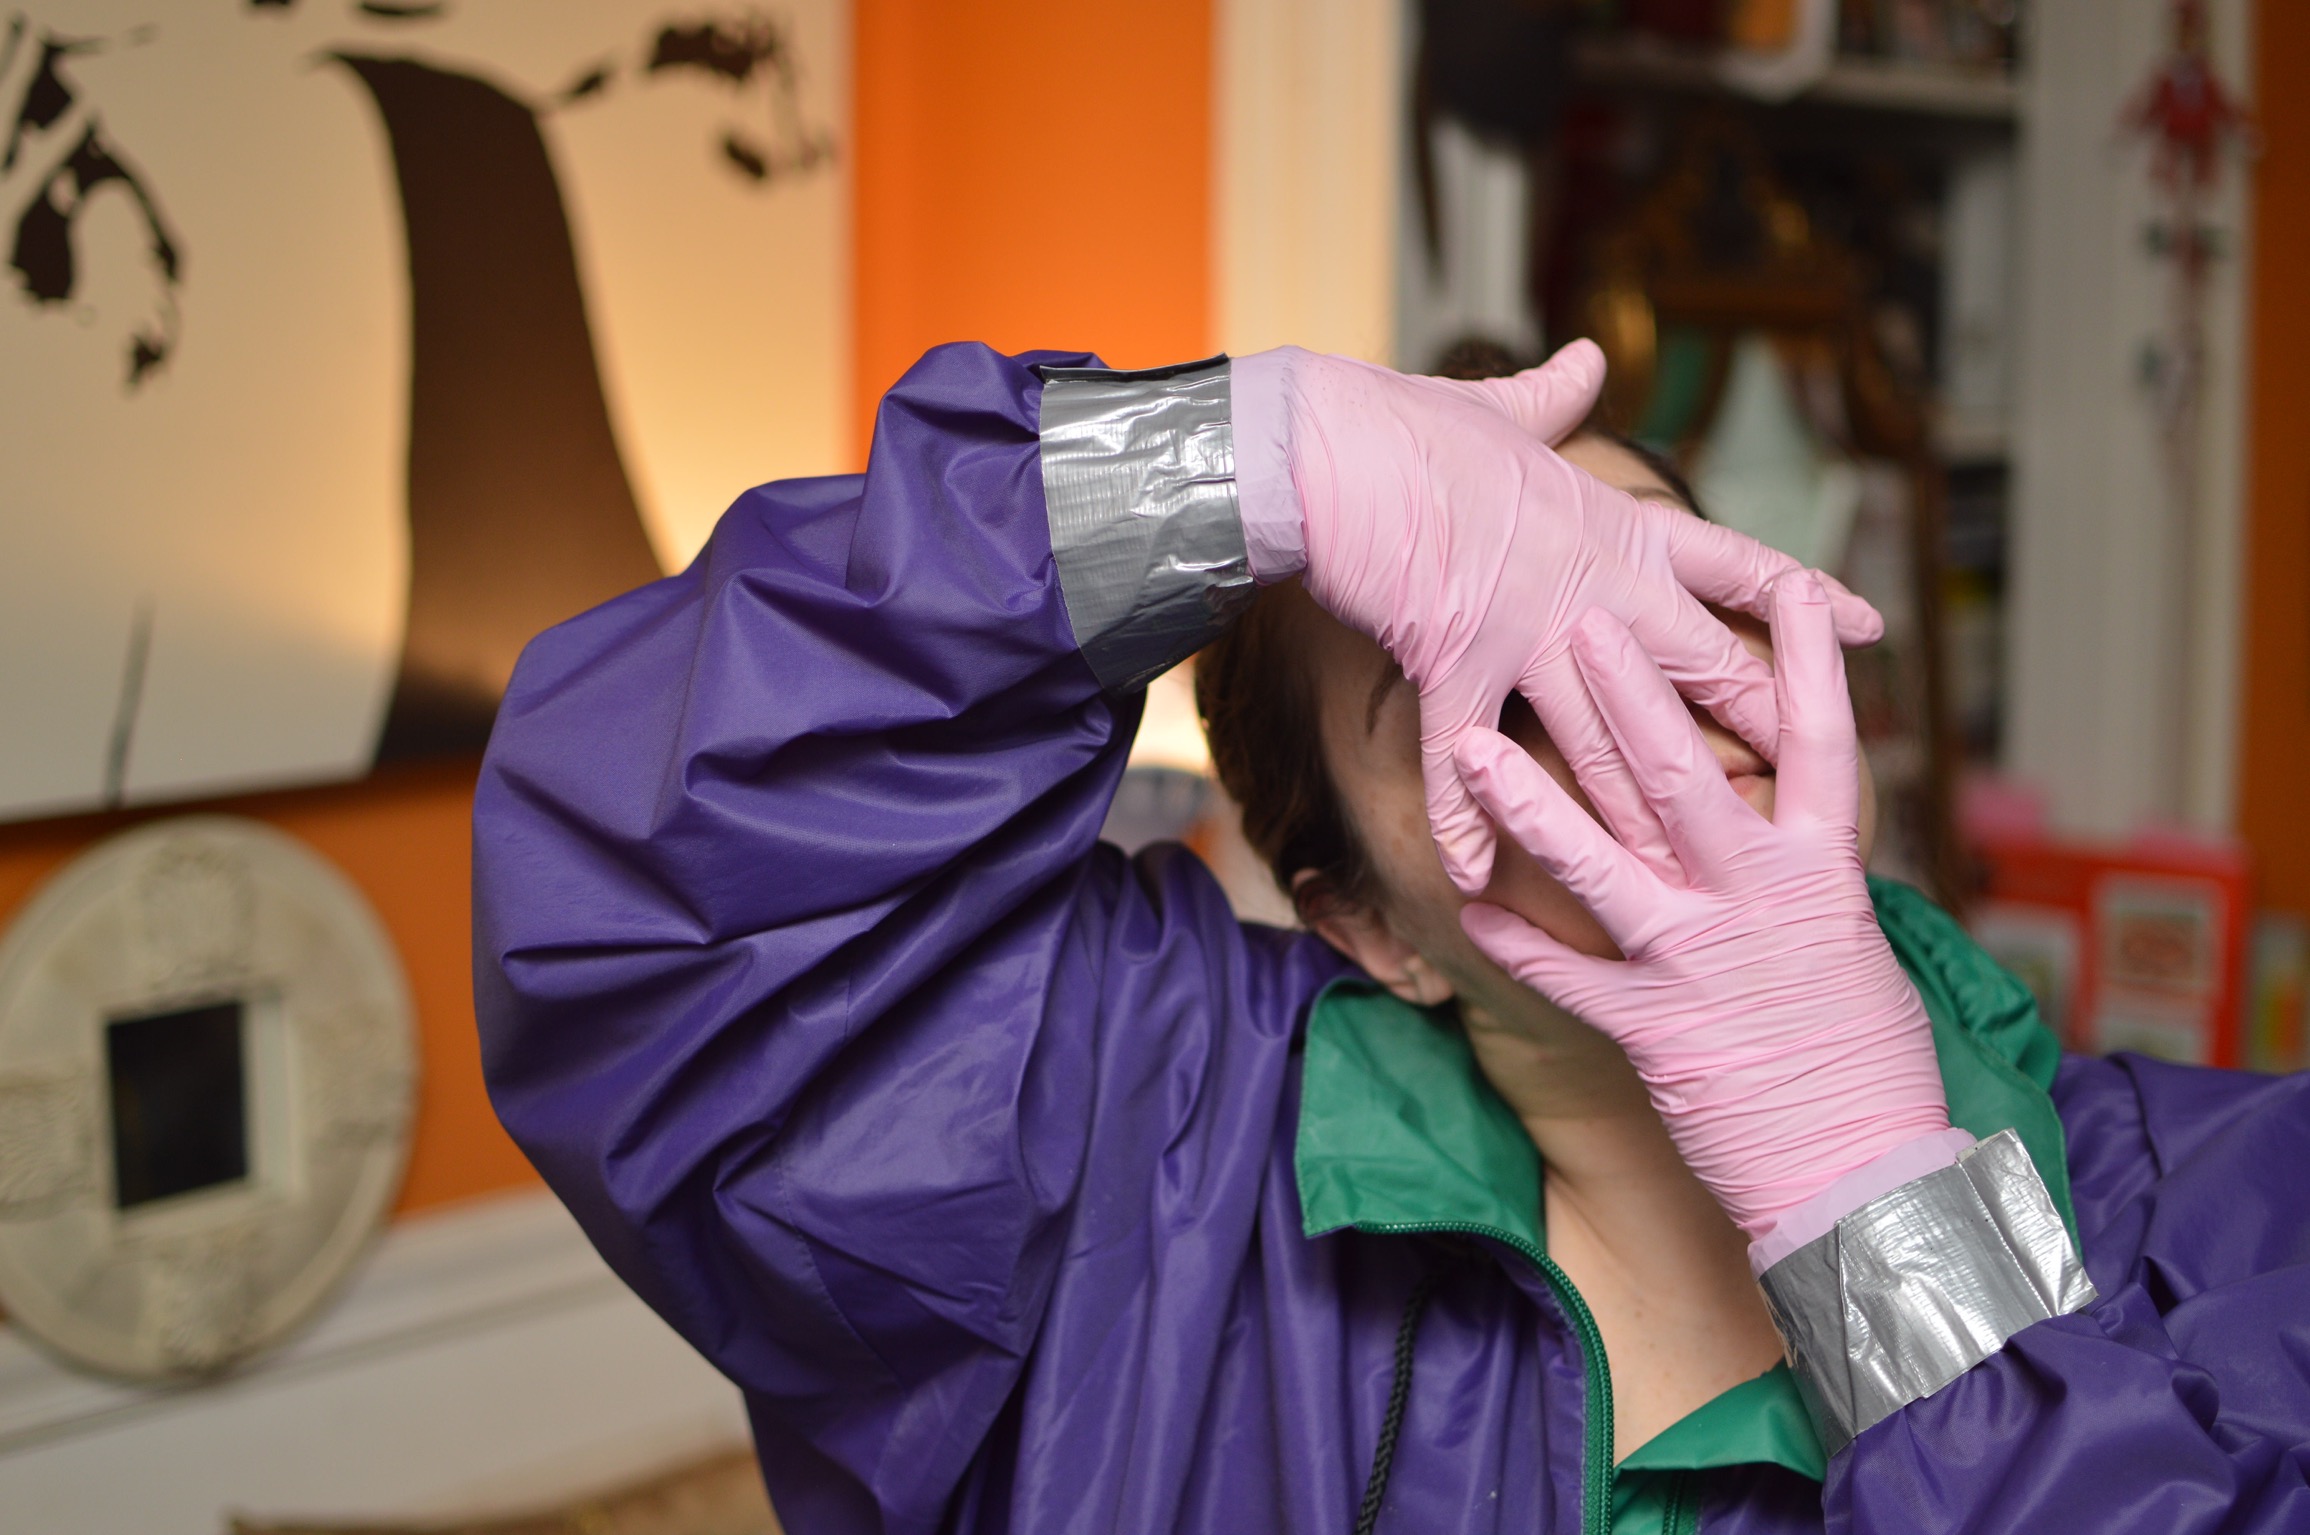 Pink latex gloves taped to vintage k-way windbreaker. Ready for my hazmat suit, sir!